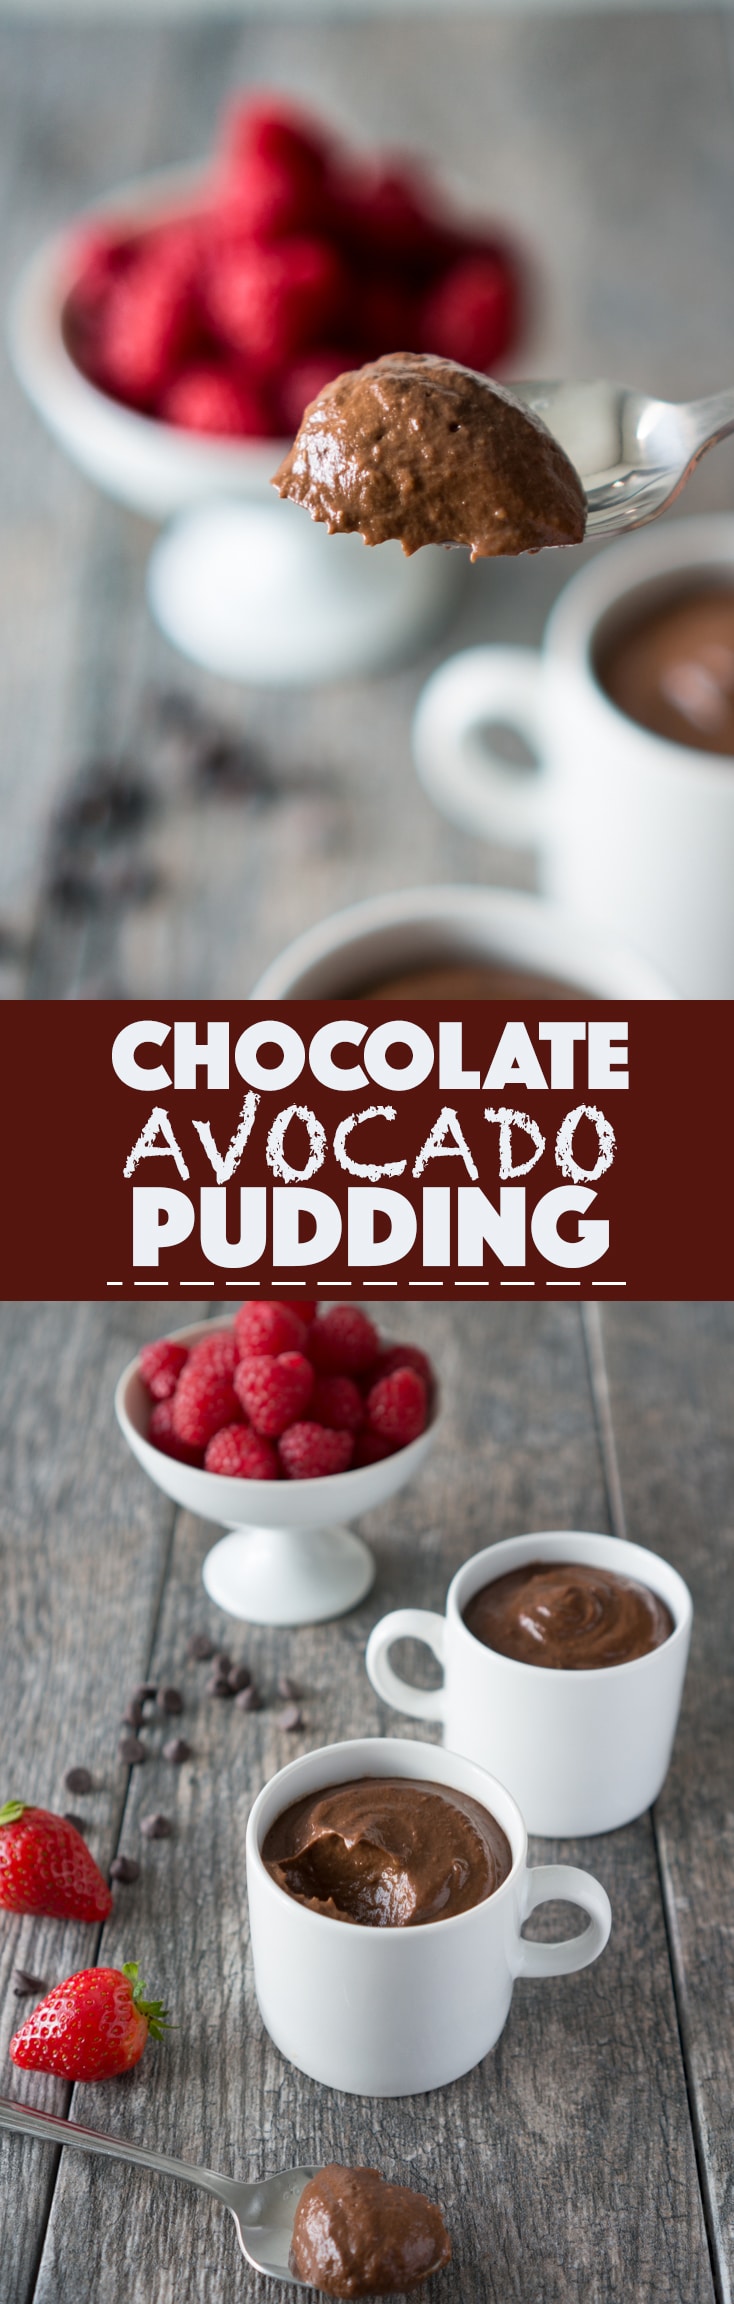 Chocolate Avocado Pudding Cups - We are loving this simple, 7-ingredient vegan dessert recipe for Chocolate Avocado Pudding Cups! Avocado + Cocoa + Peanut Butter + Banana + Coconut Nectar + Vanilla + Salt ♥ Just can't get enough! | freeyourfork.com